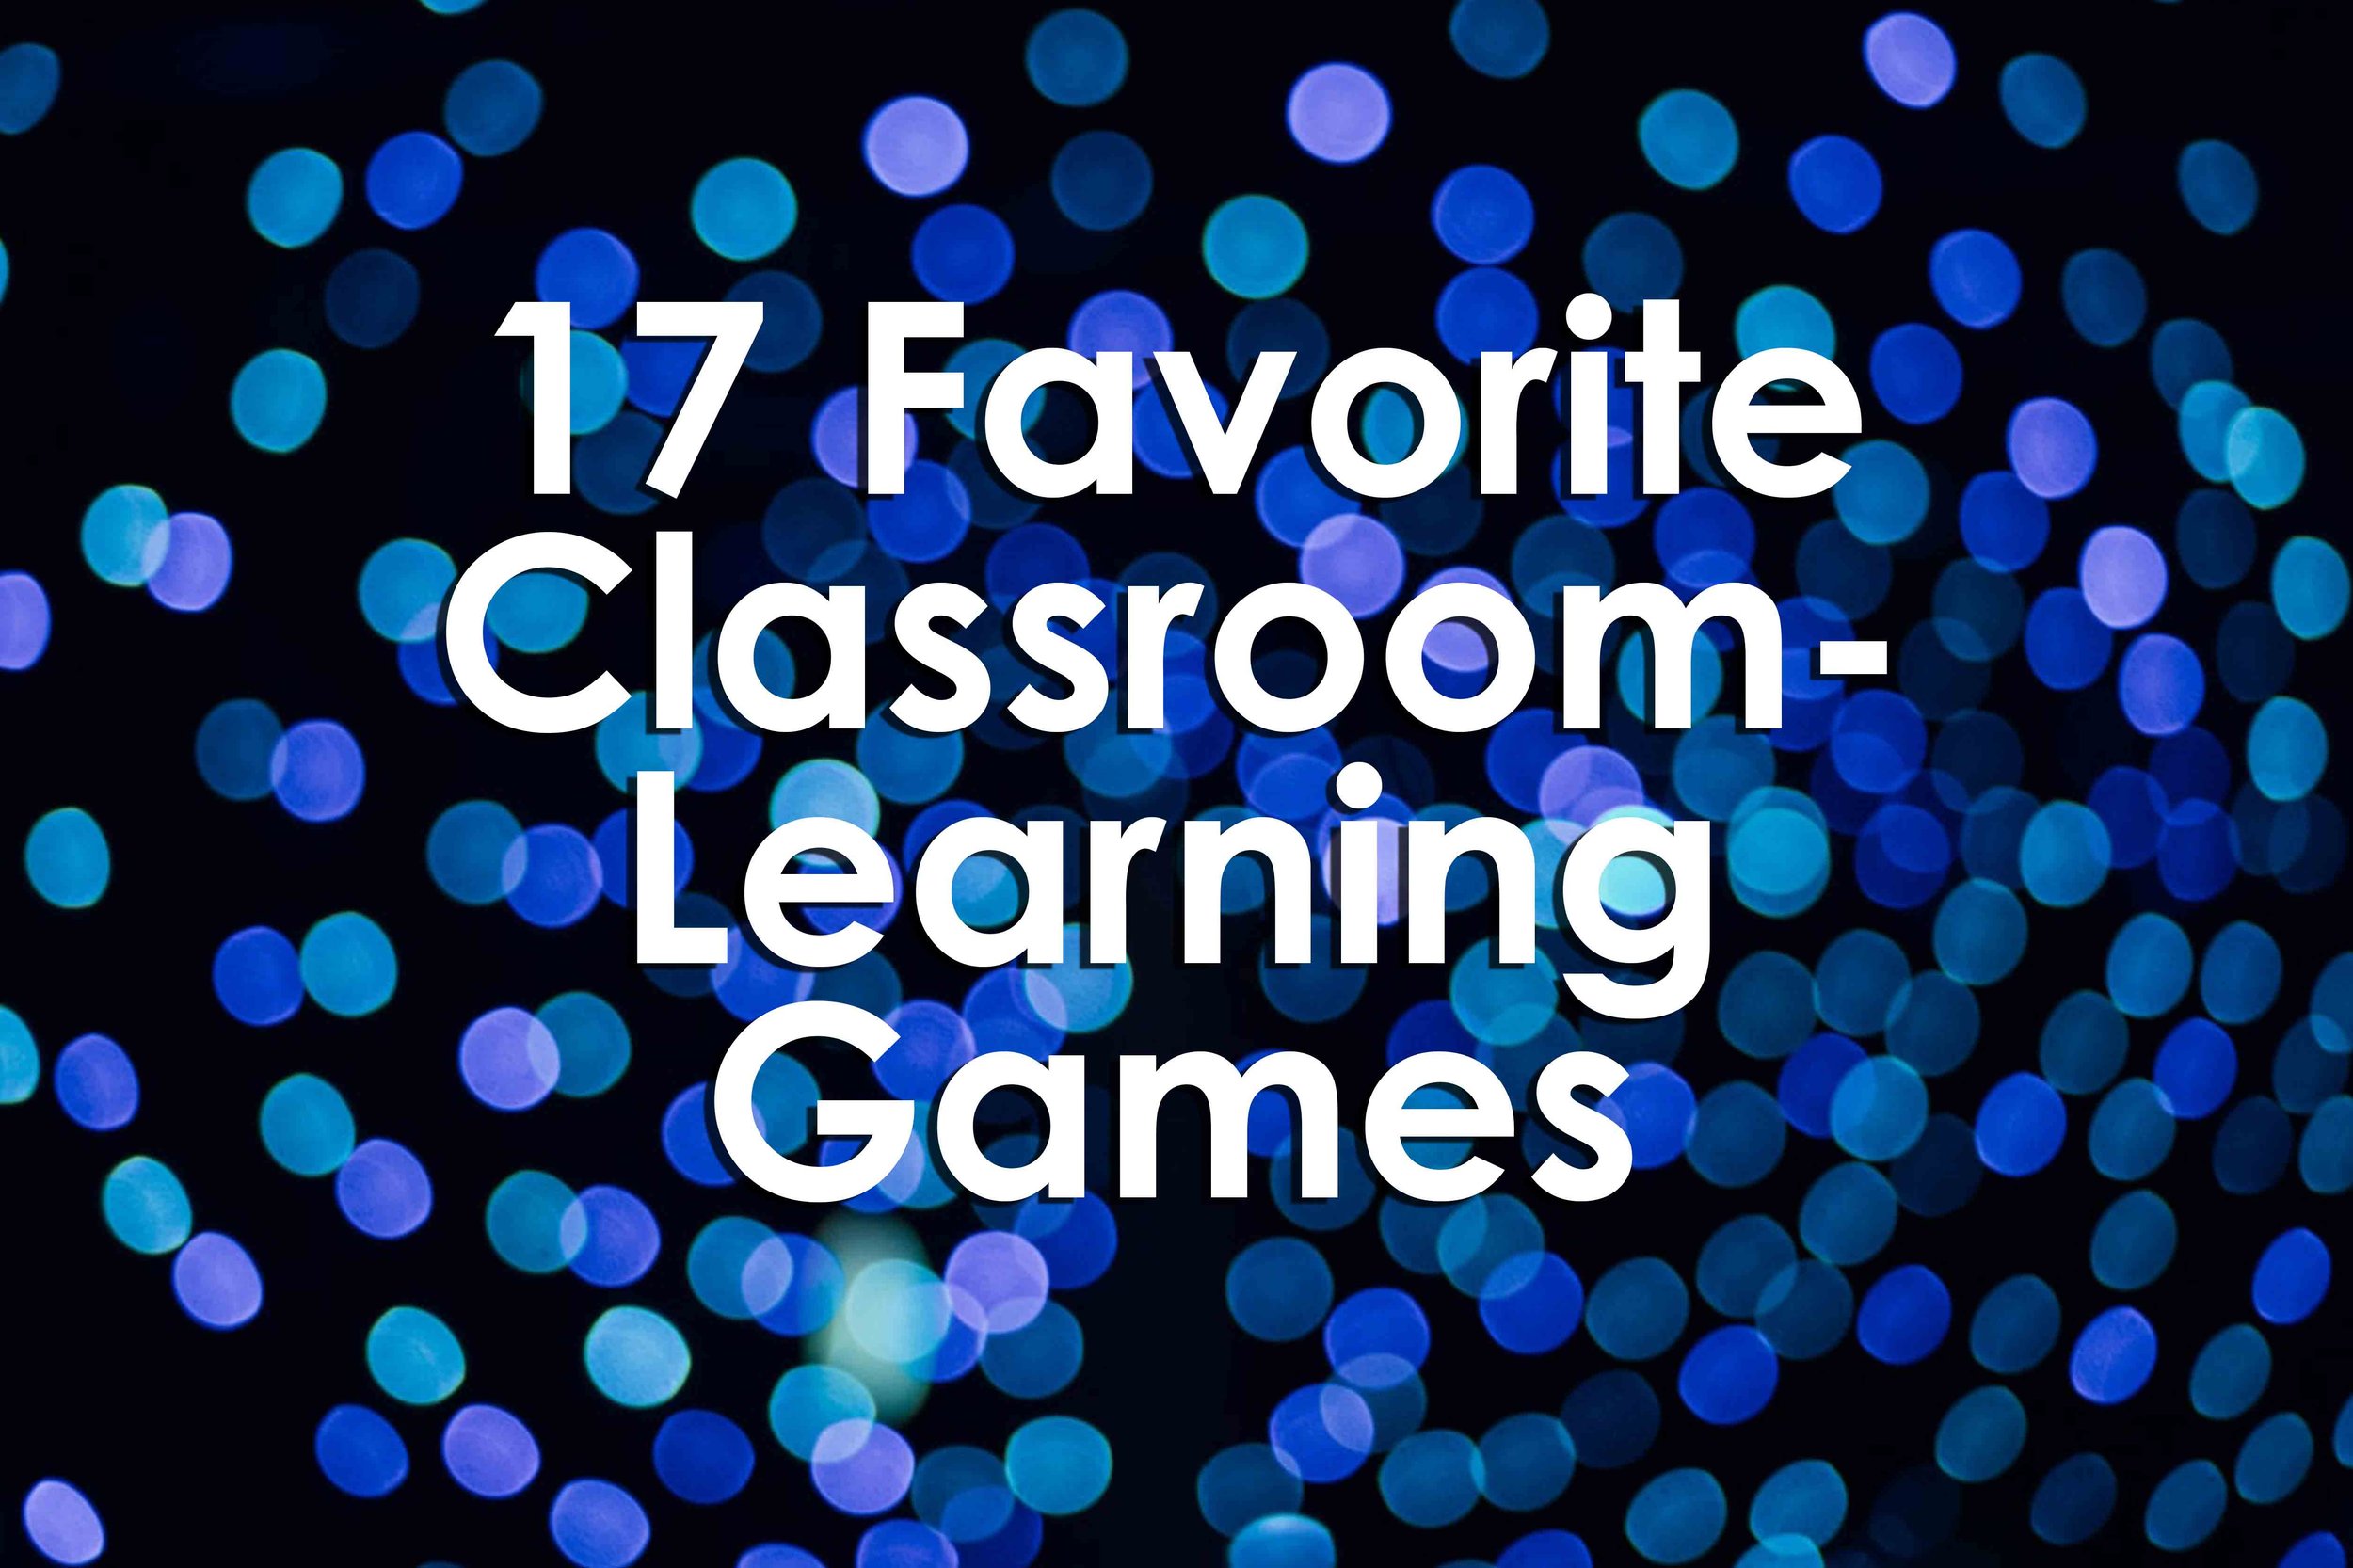 17 Favorite Classroom-Learning Games (Opinion)